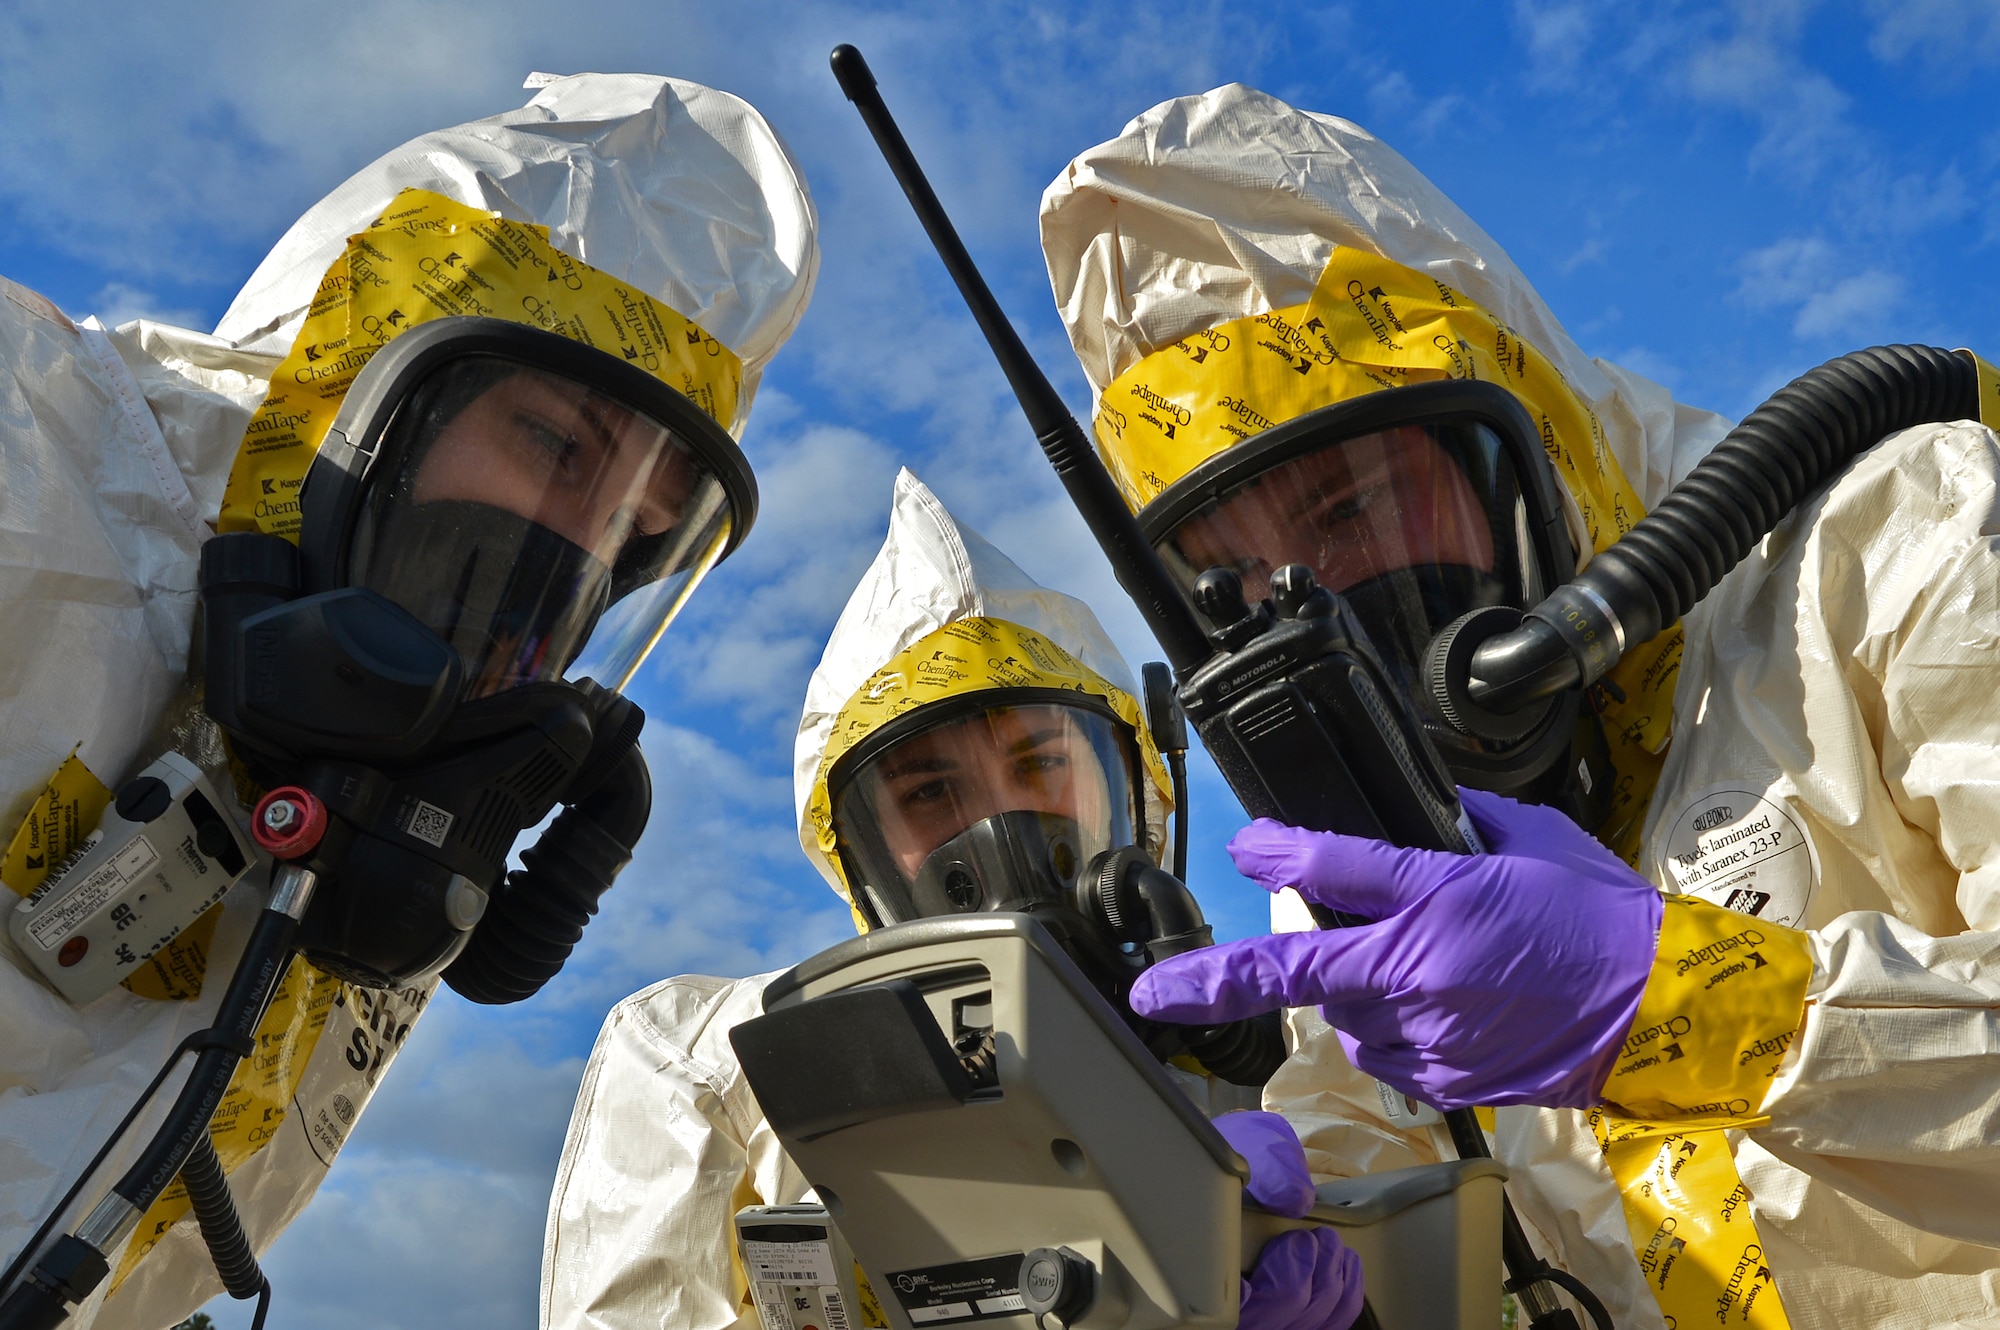 (From left) U.S. Air Force Senior Airman Lauren Yancey, and Chantal Hogue, 20th Civil Engineer Squadron emergency management apprentices, and Senior Airman Jordan Gagne, 20th Aerospace Medicine Squadron bioenvironmental engineering journeyman, assess their gages while checking for simulated hazardous chemicals during an integrated base emergency response capability training at Shaw Air Force Base, S.C., Dec. 9, 2014. The Airmen worked together to assess the spread of simulated chemicals while being evaluated on their performance. (U.S. Air Force photo by Staff Sgt. Kenny Holston/Released)      